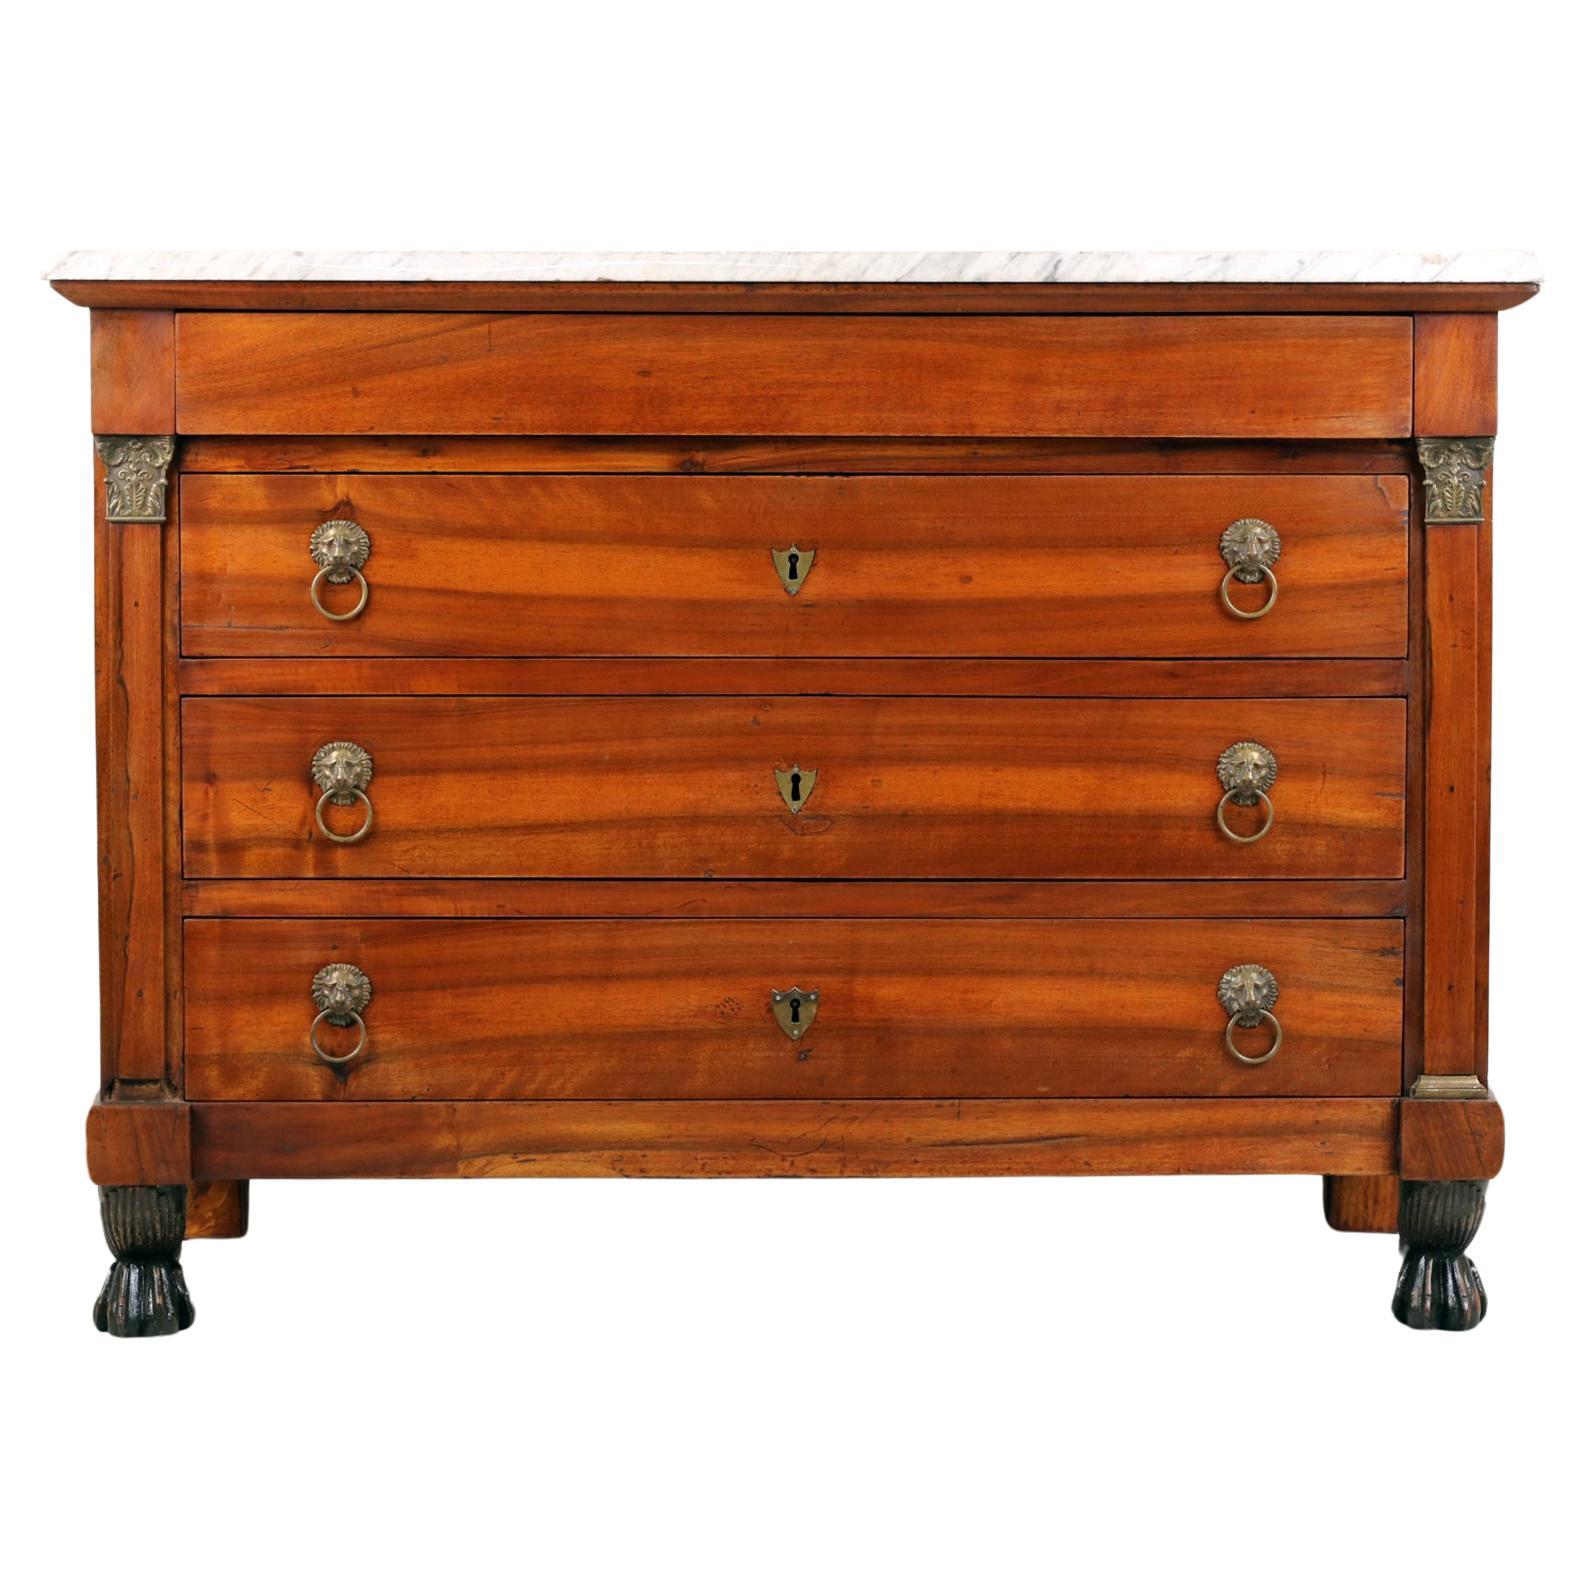 Empire Chest od Drawers with white marble on top,
France, Ca. 1830

Spectacular Commode with original white marble on top and original empire legs. Front of drawers and sides of the body made of solid walnut.  Pilasters with brass bases and